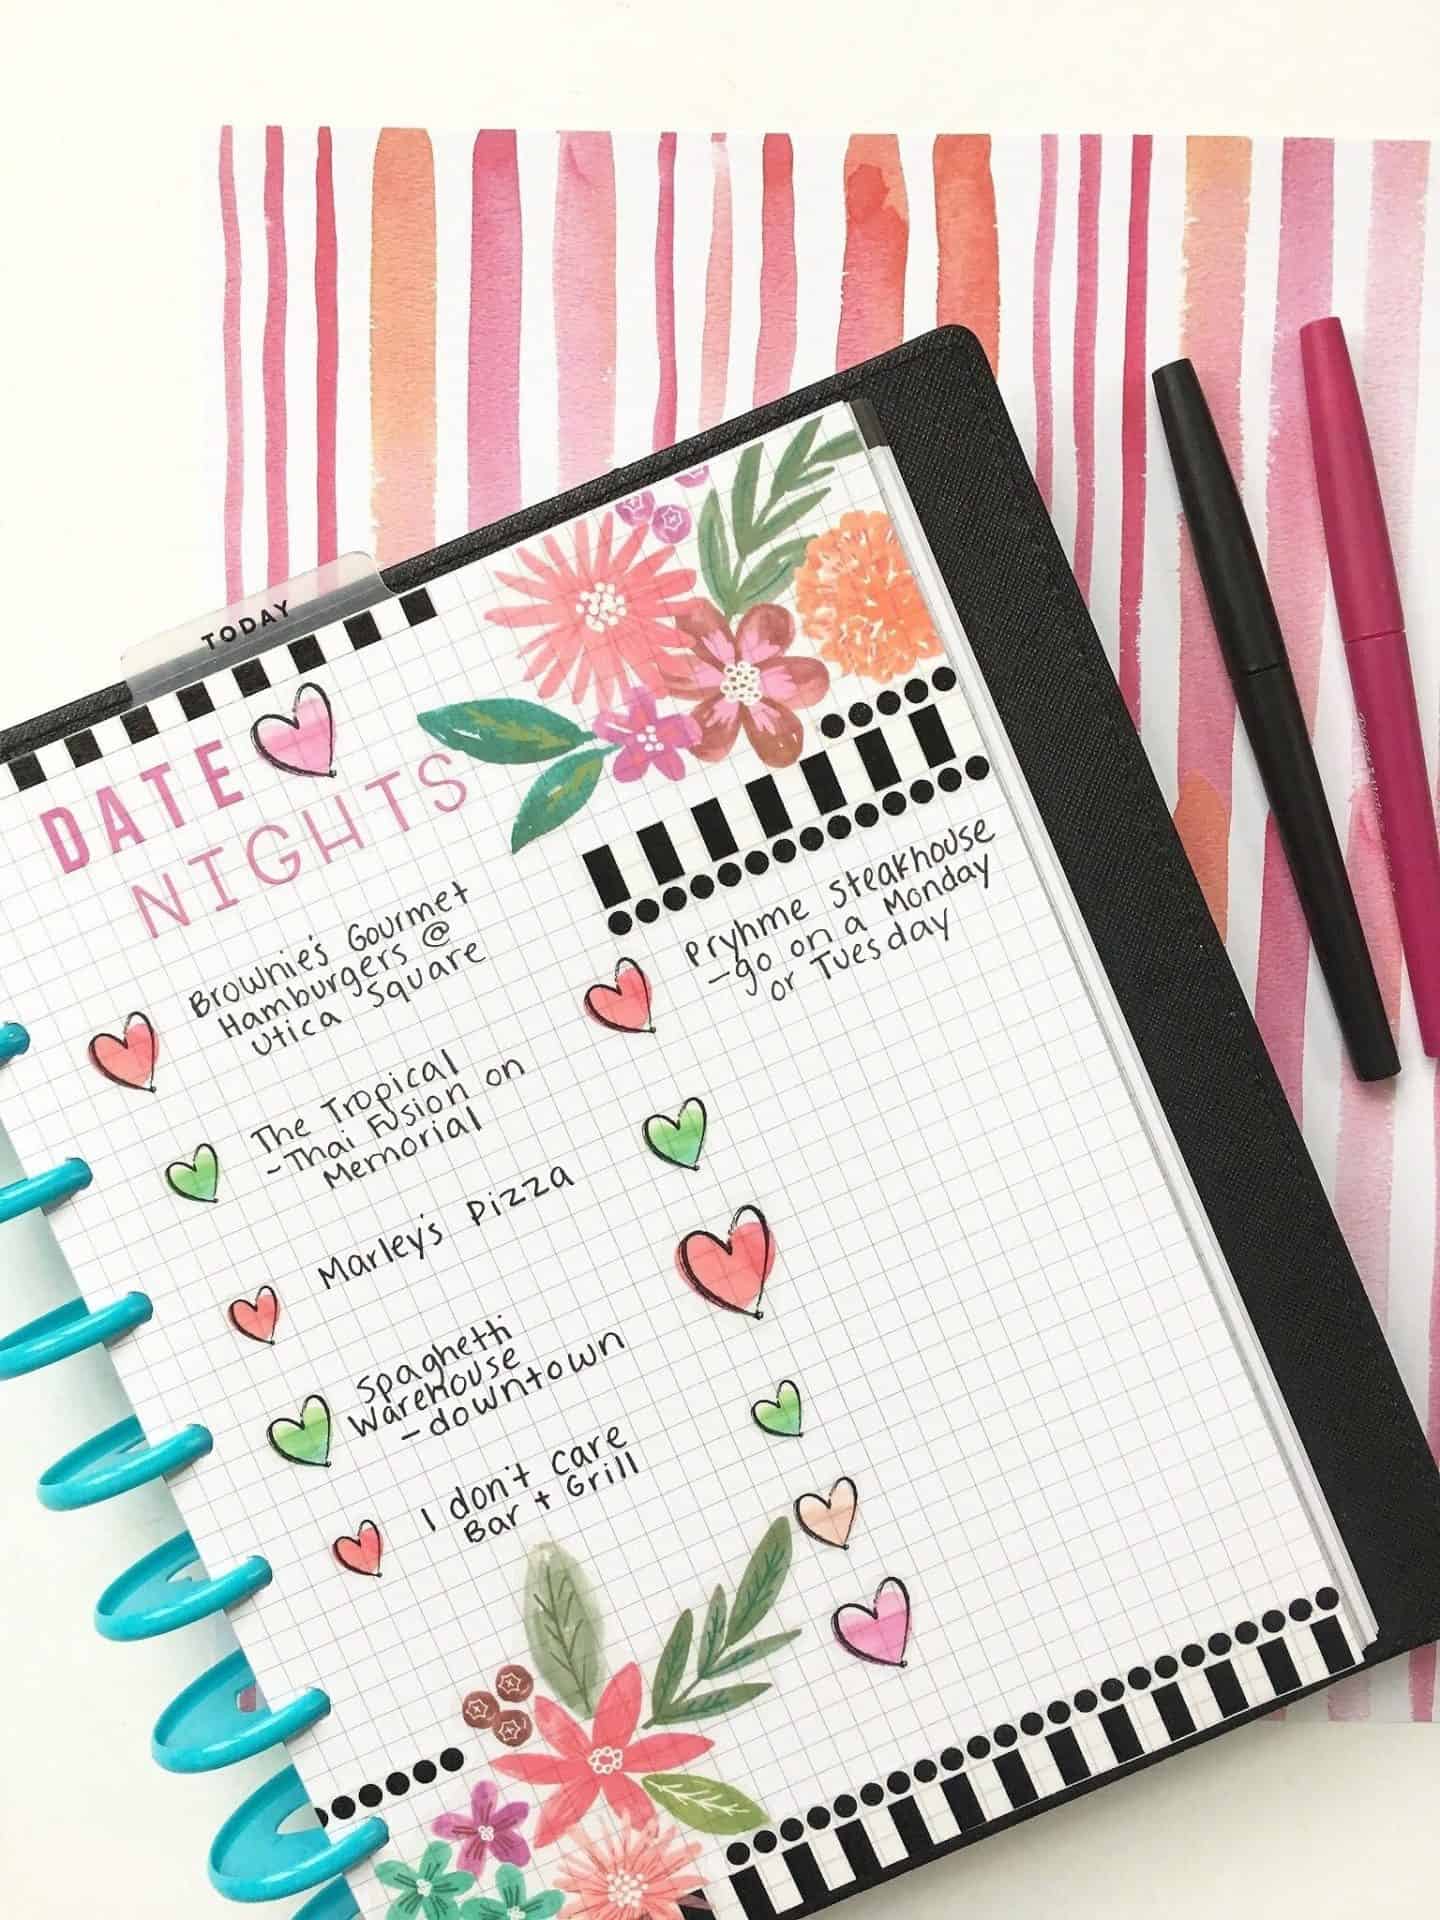 A “Favorite Things” Journal